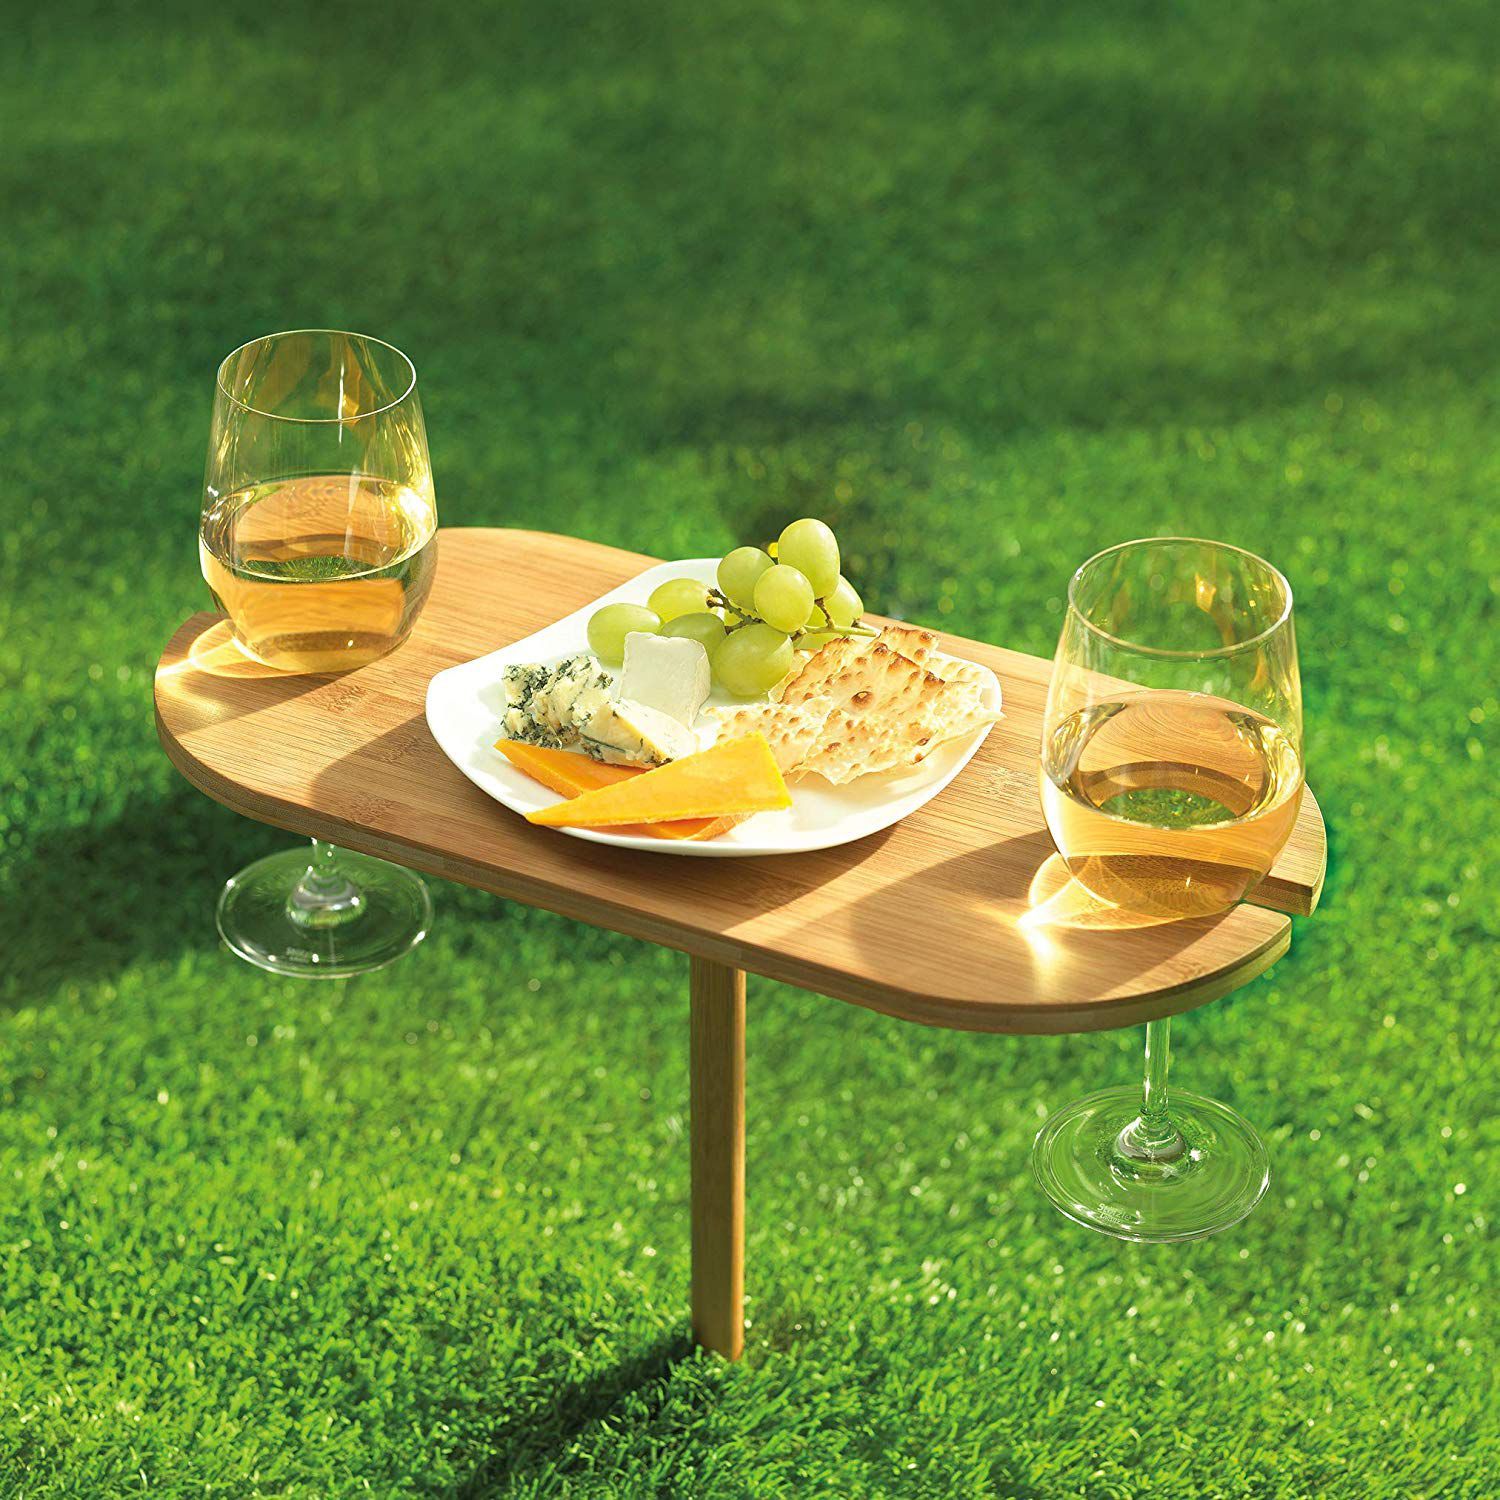 Tovolo Outdoor Wine Holder Bamboo Table